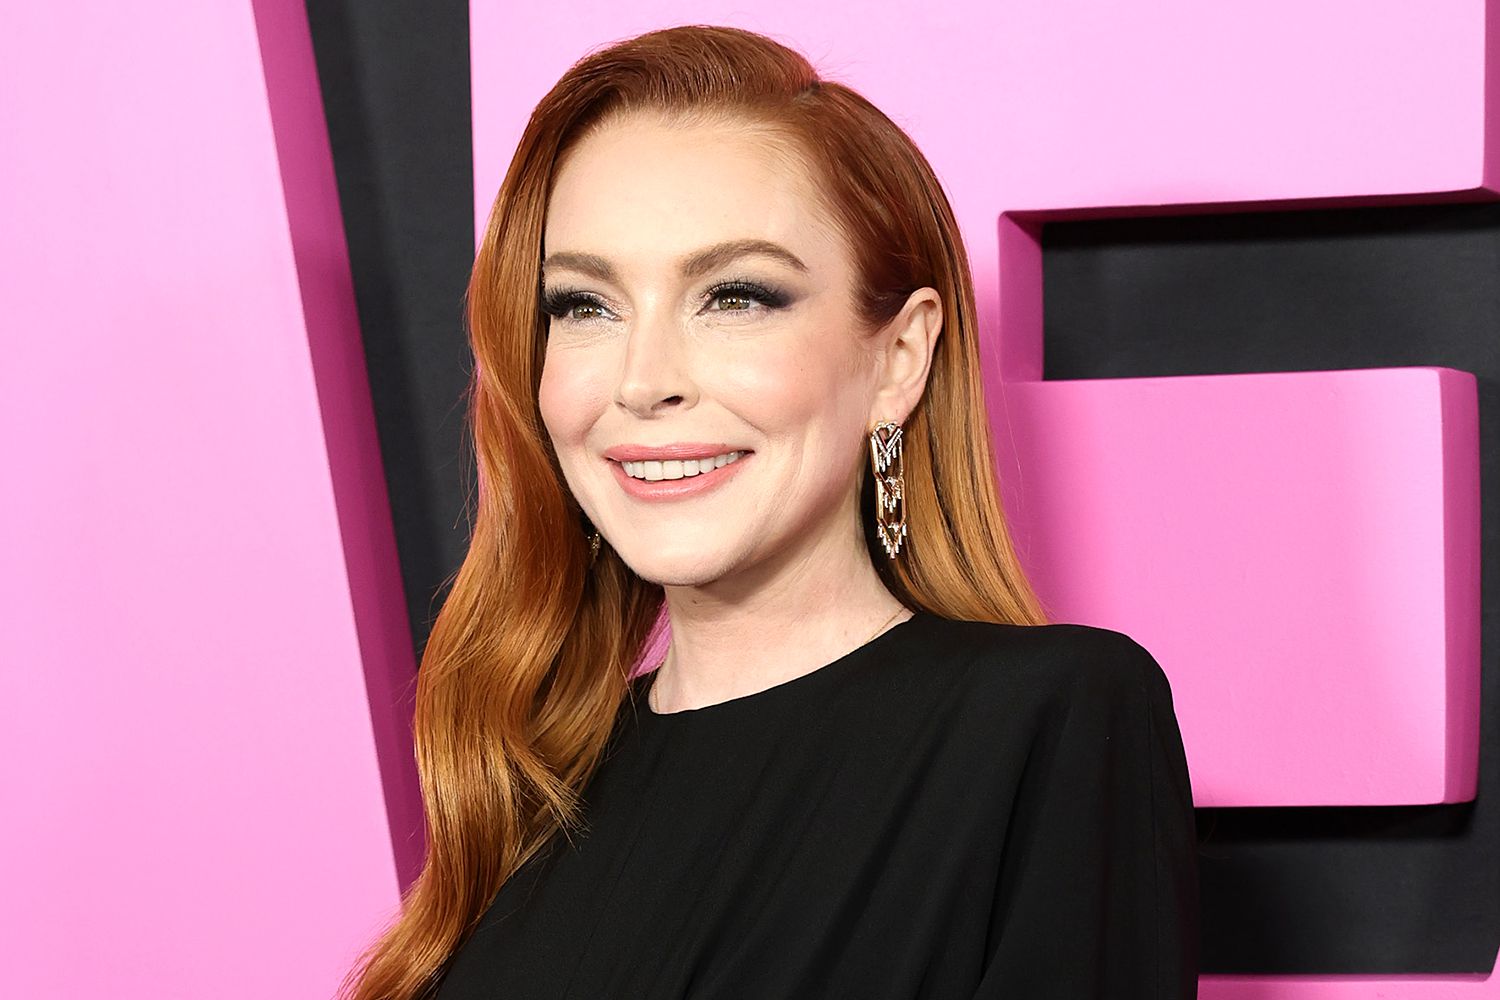 Lindsay Lohan Spotted With Family In Georgia During Netflix Shoot